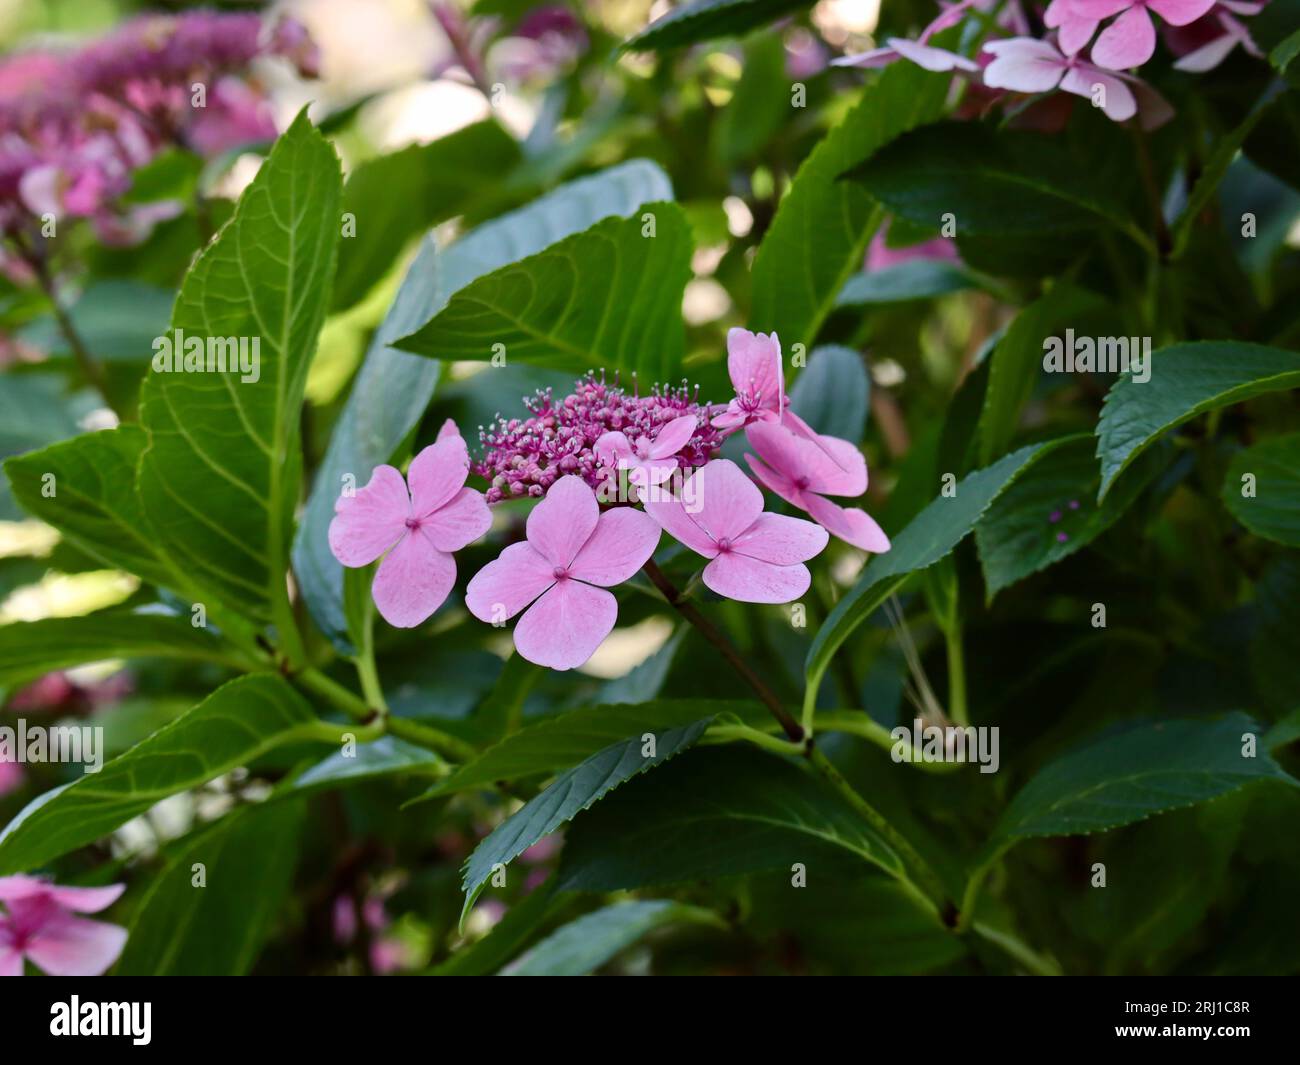 Vibrant pink bloom: a delicate testament to nature's elegance and beauty. Stock Photo